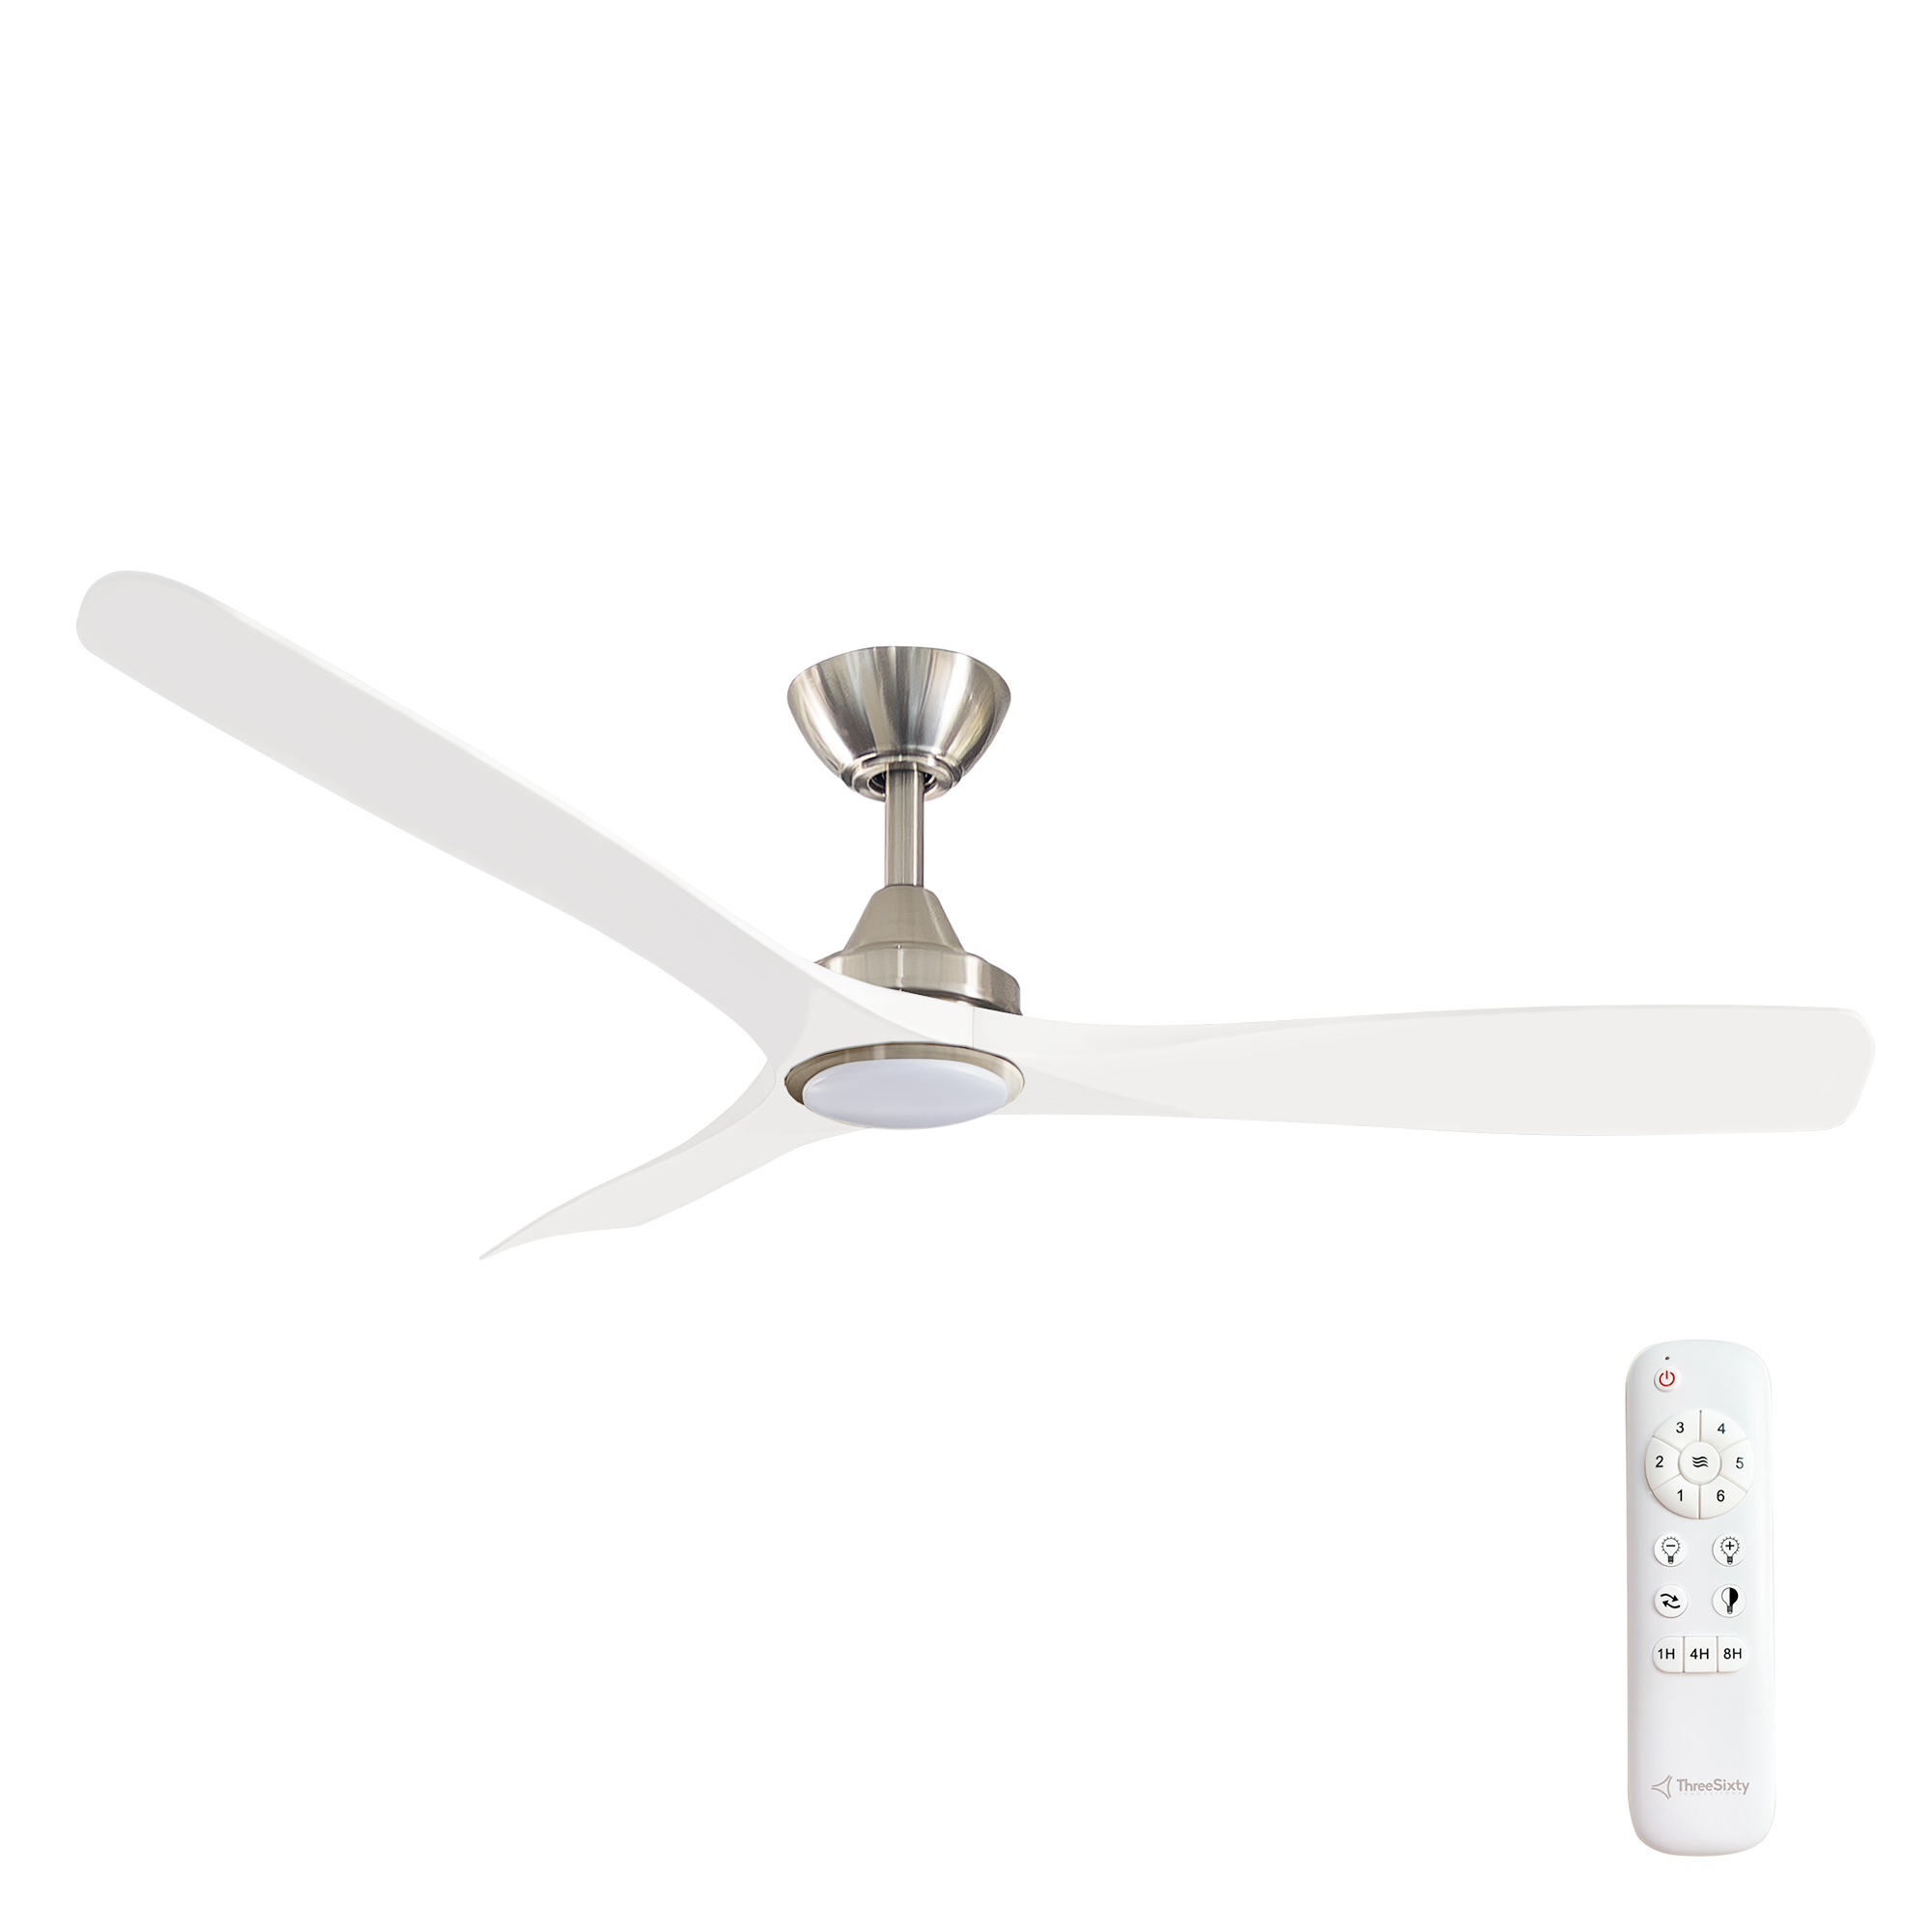 52" Spitfire DC Ceiling Fan in Brushed Nickel with White blades and 18W CCT LED Light